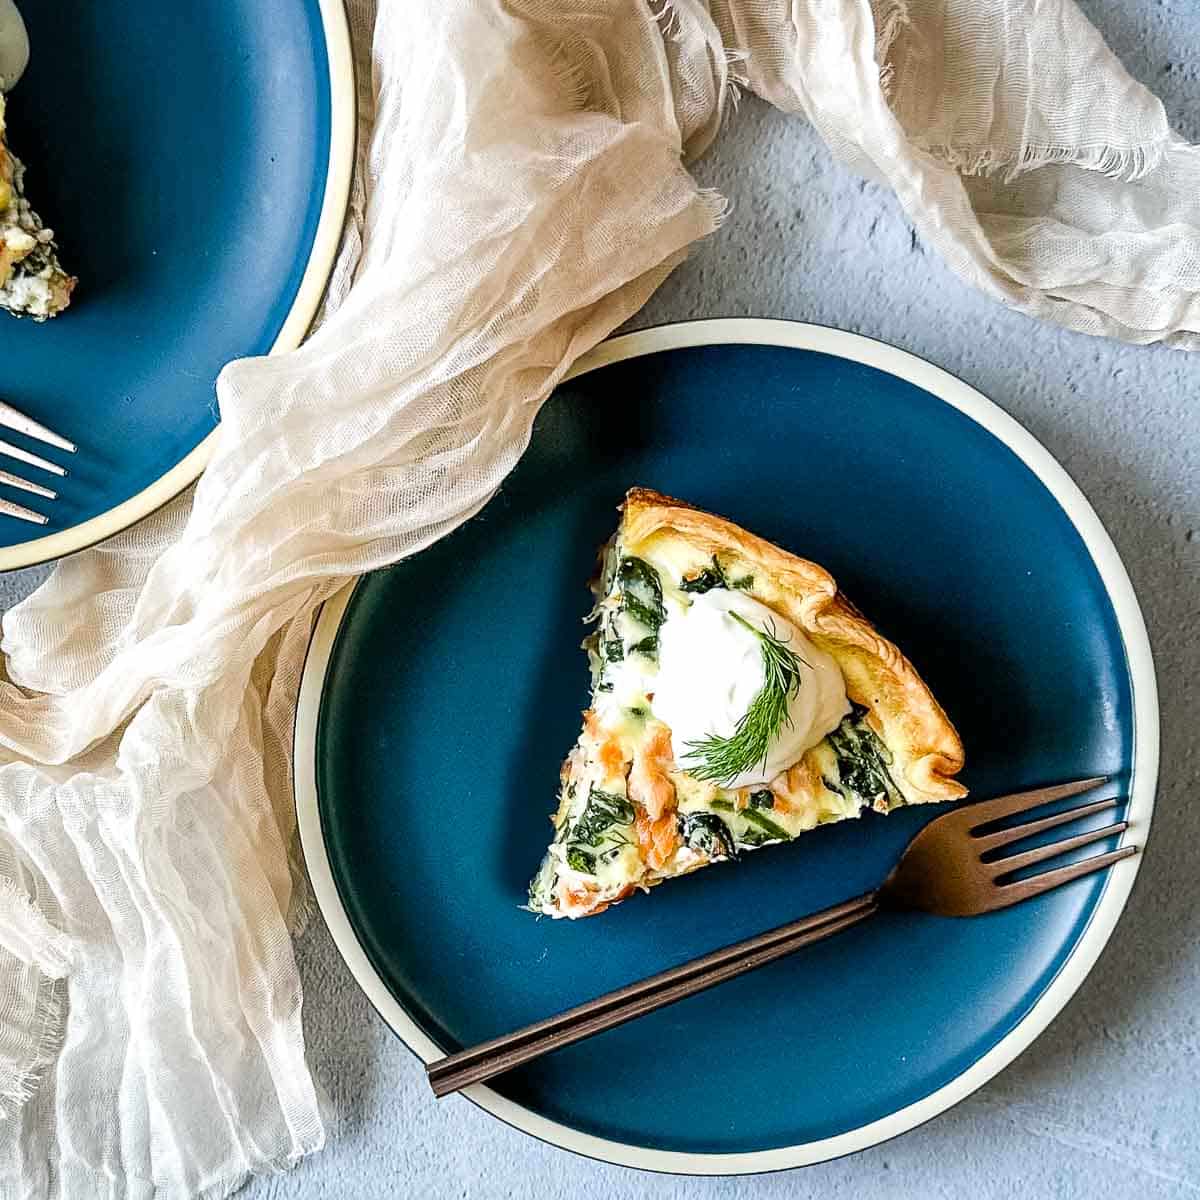 a slice of smoked salmon and spinach quiche on a teal plate with a copper fork.